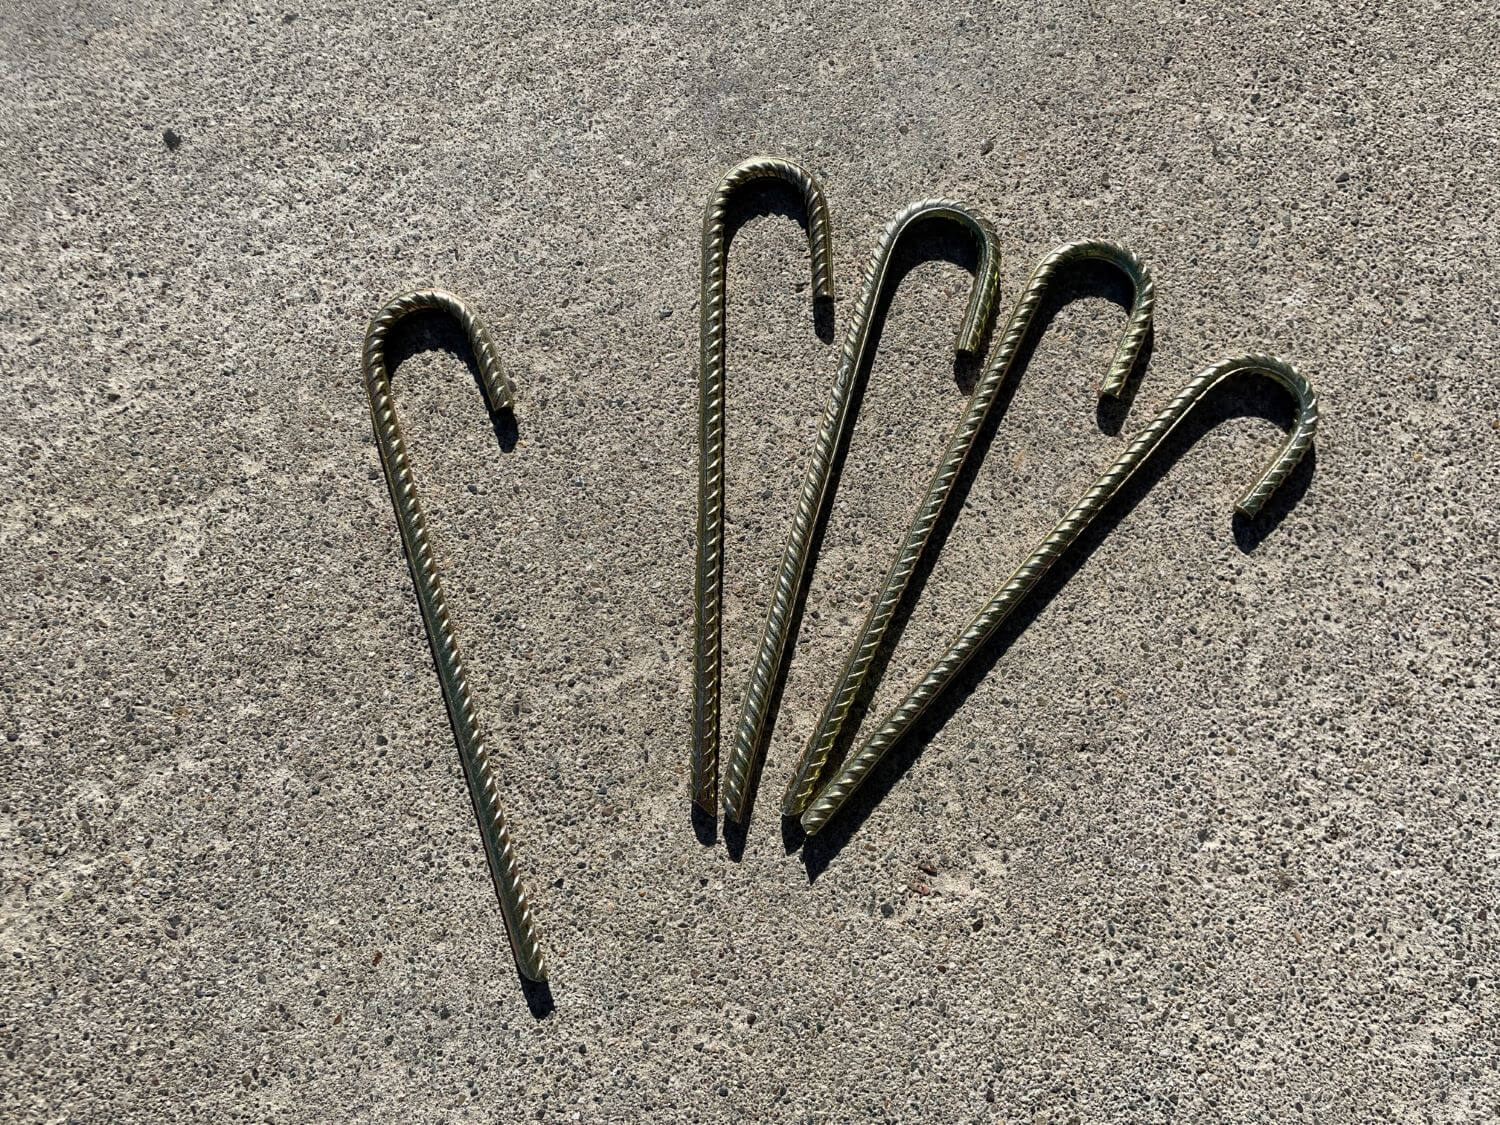  Rebar Stakes 12 Inch 16 Pack Tent Stakes Heavy Duty